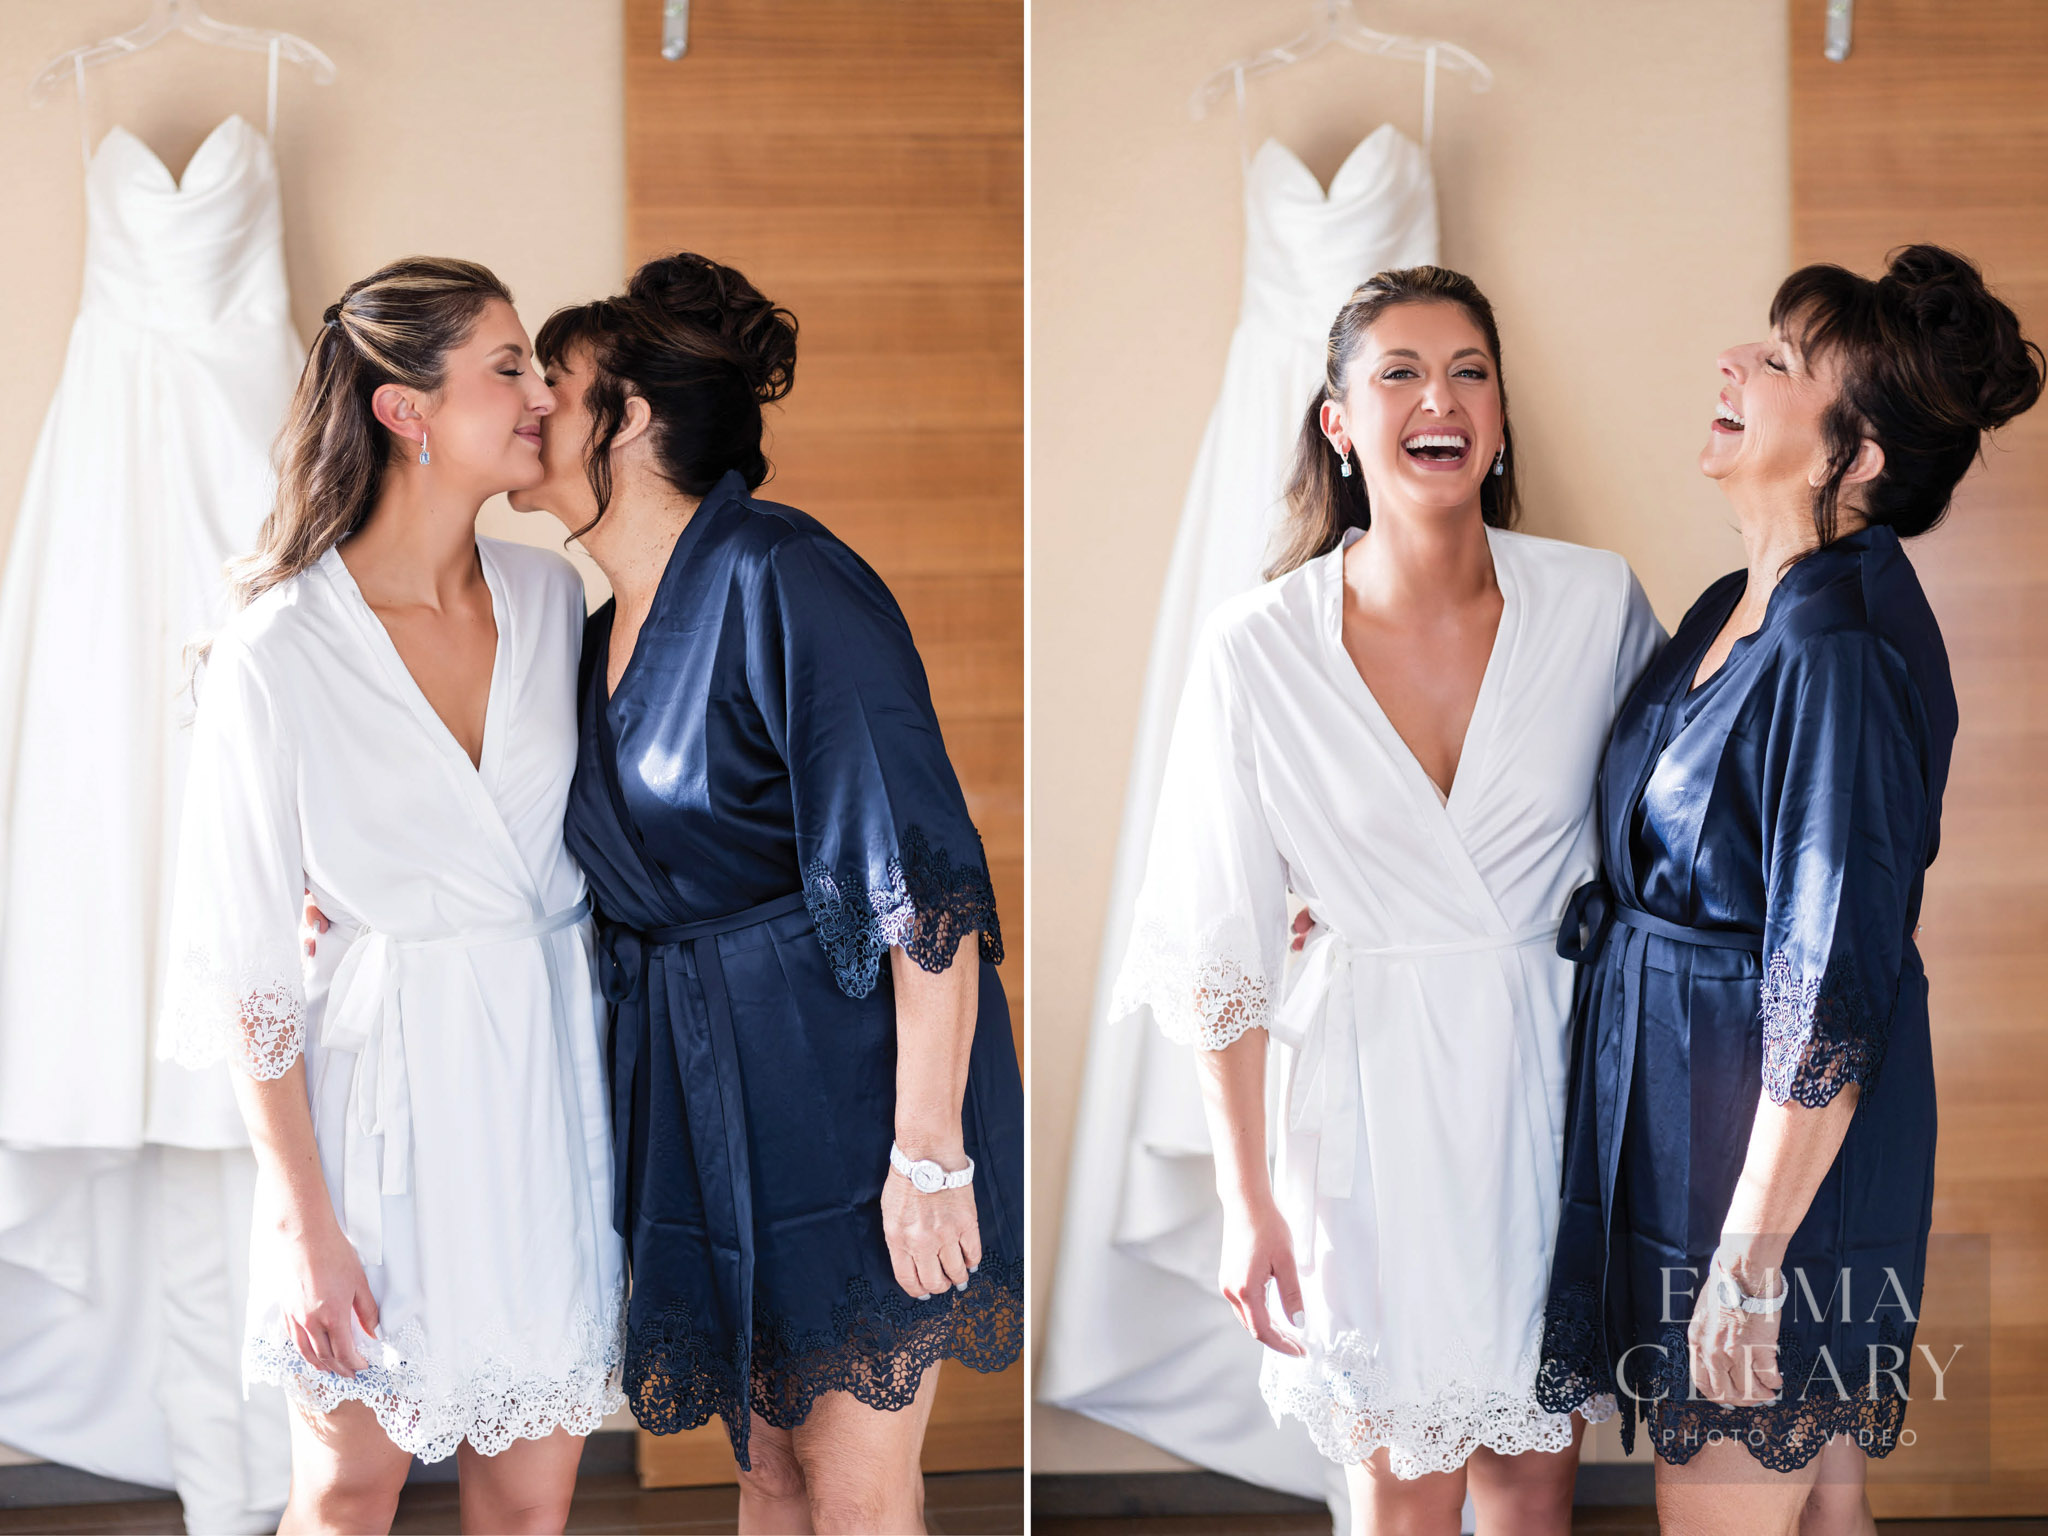 Lovely photos of bride and her mother